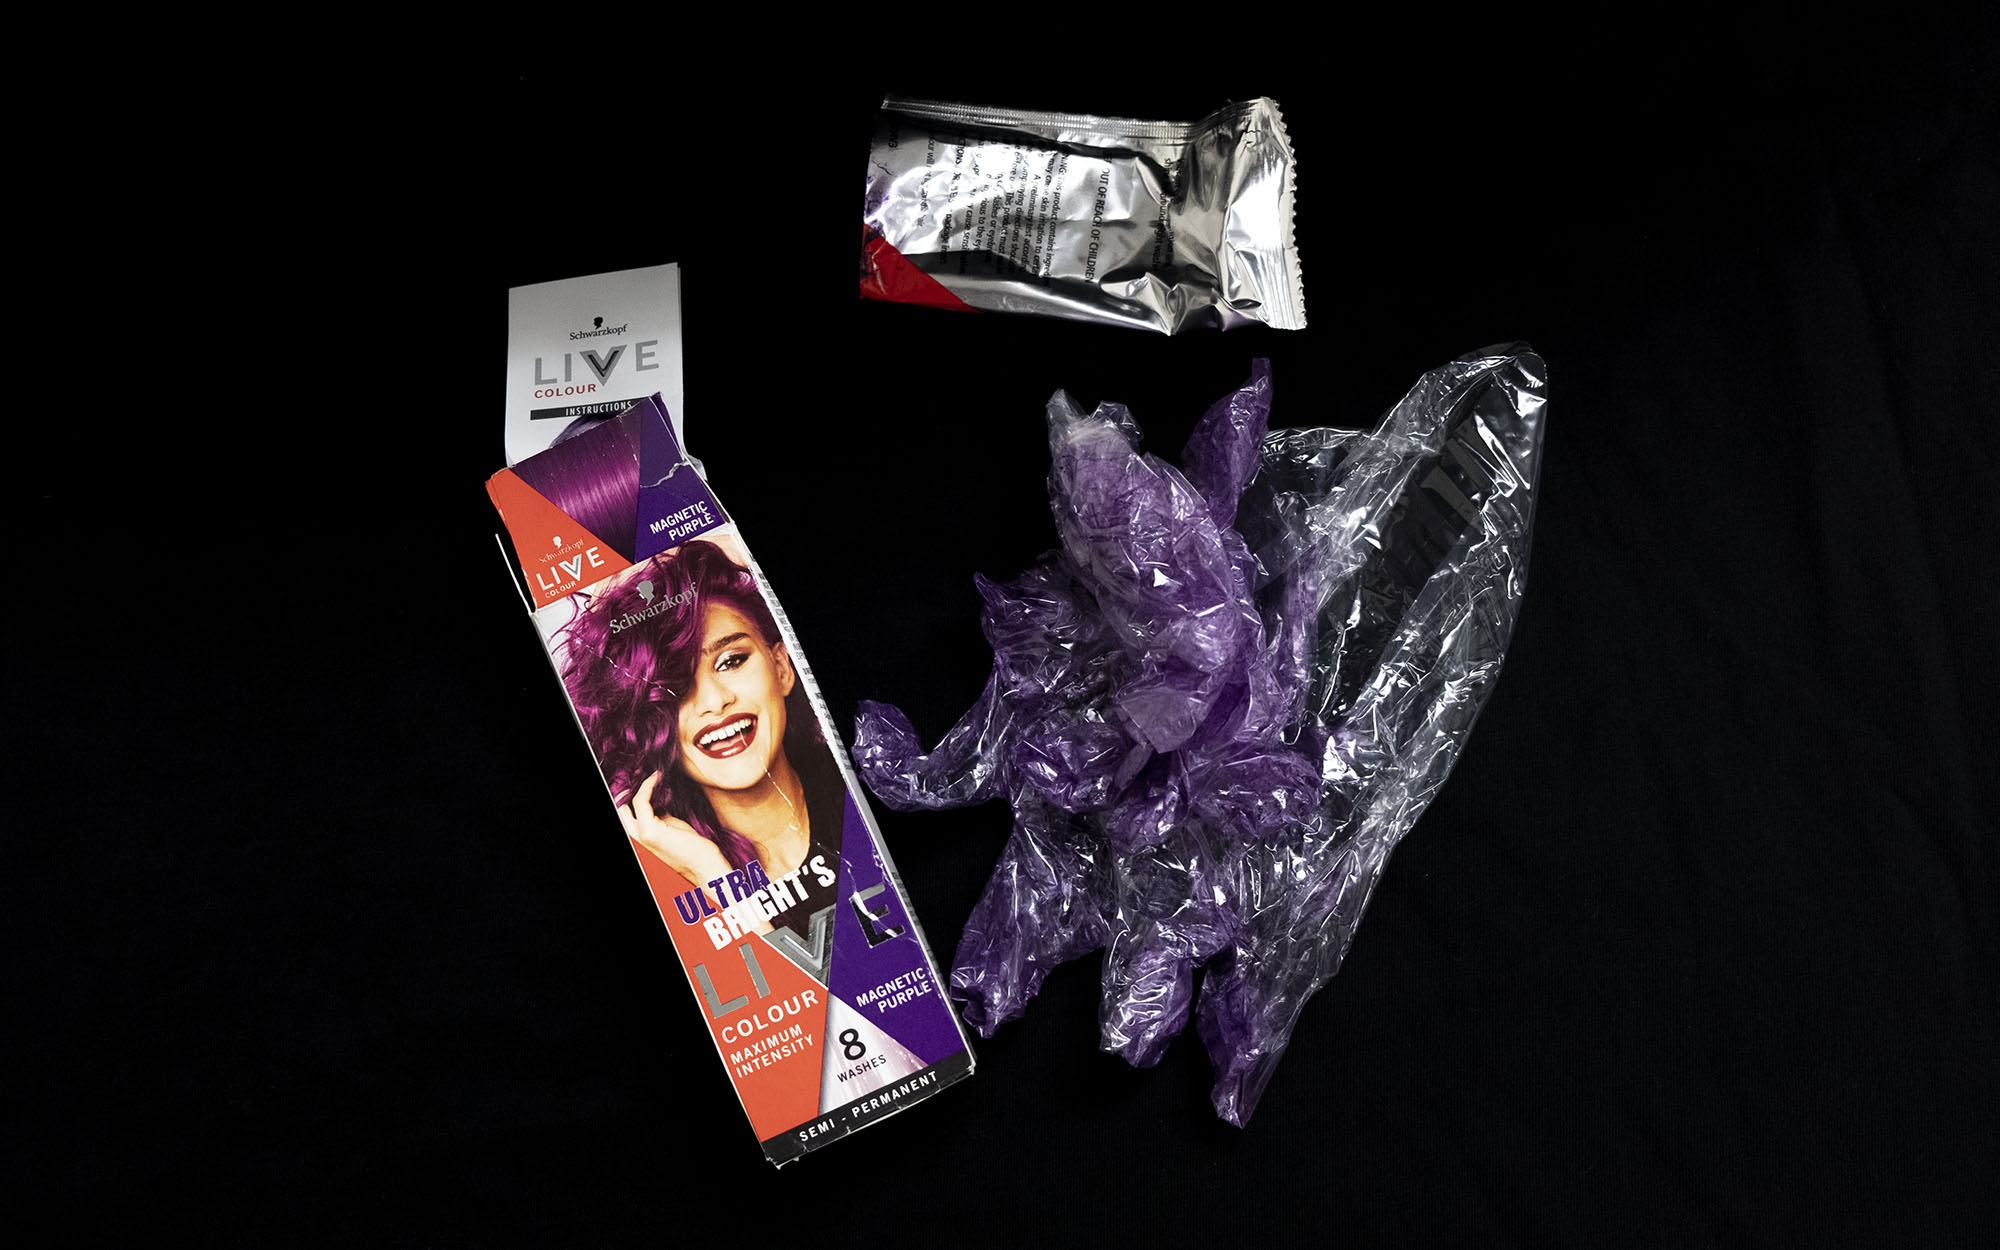 The contents of a used box of hair dye, including gloves dyed purple from application